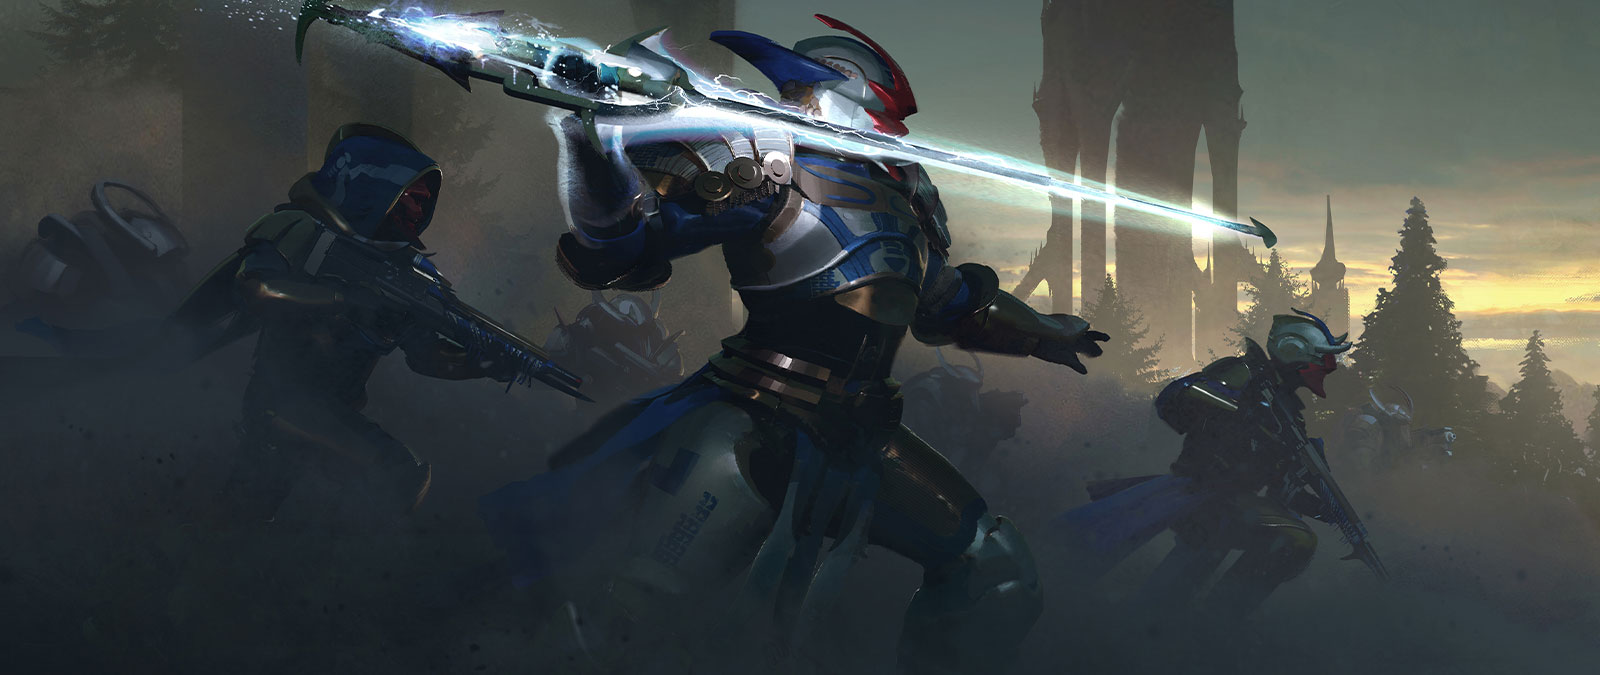 An armored warrior prepares to throw an electrified javelin on the battlefield. 